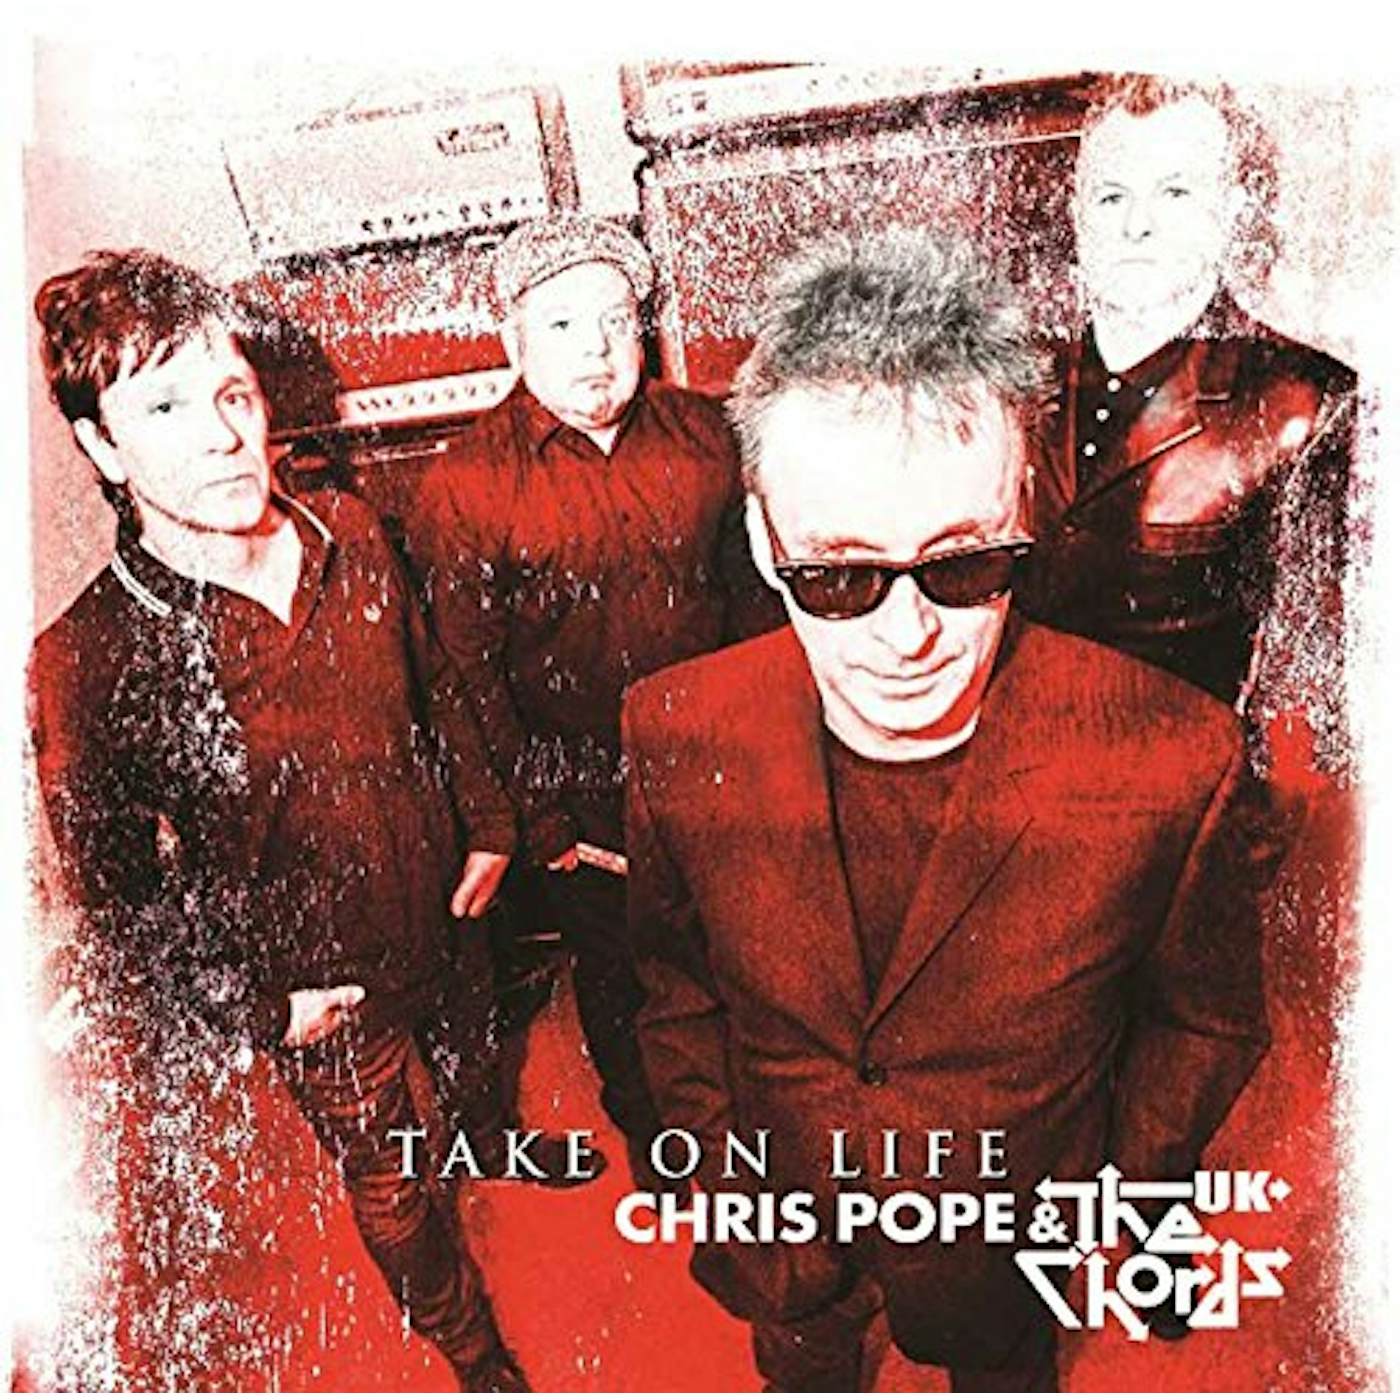 Chris Pope & The Chords Take on Life Vinyl Record